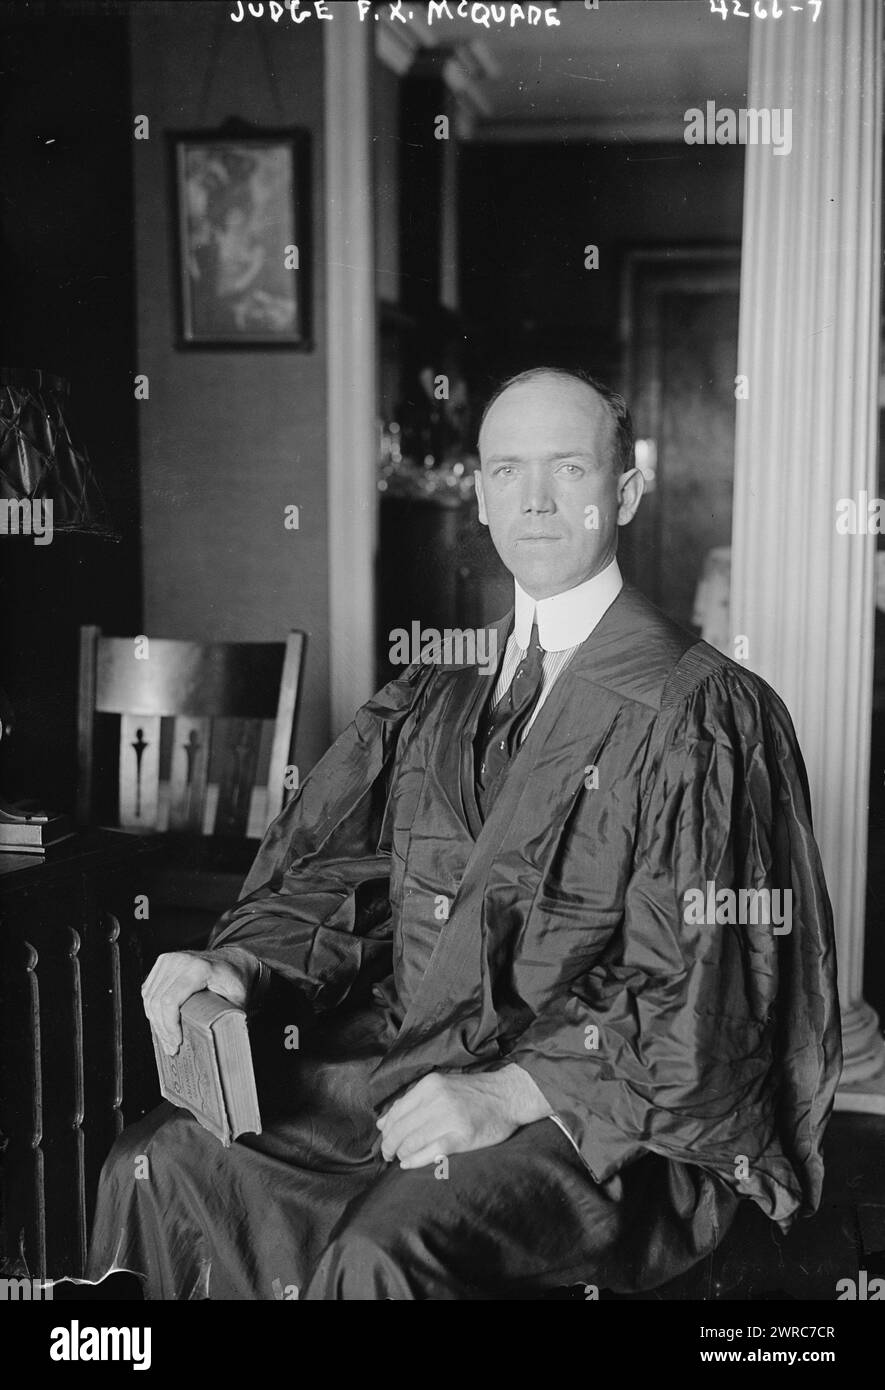 Judge F.X. McQuade, Photograph shows Francis Xavier McQuade (d. 1955) who served as a New York City magistrate., between ca. 1915 and ca. 1920, Glass negatives, 1 negative: glass Stock Photo